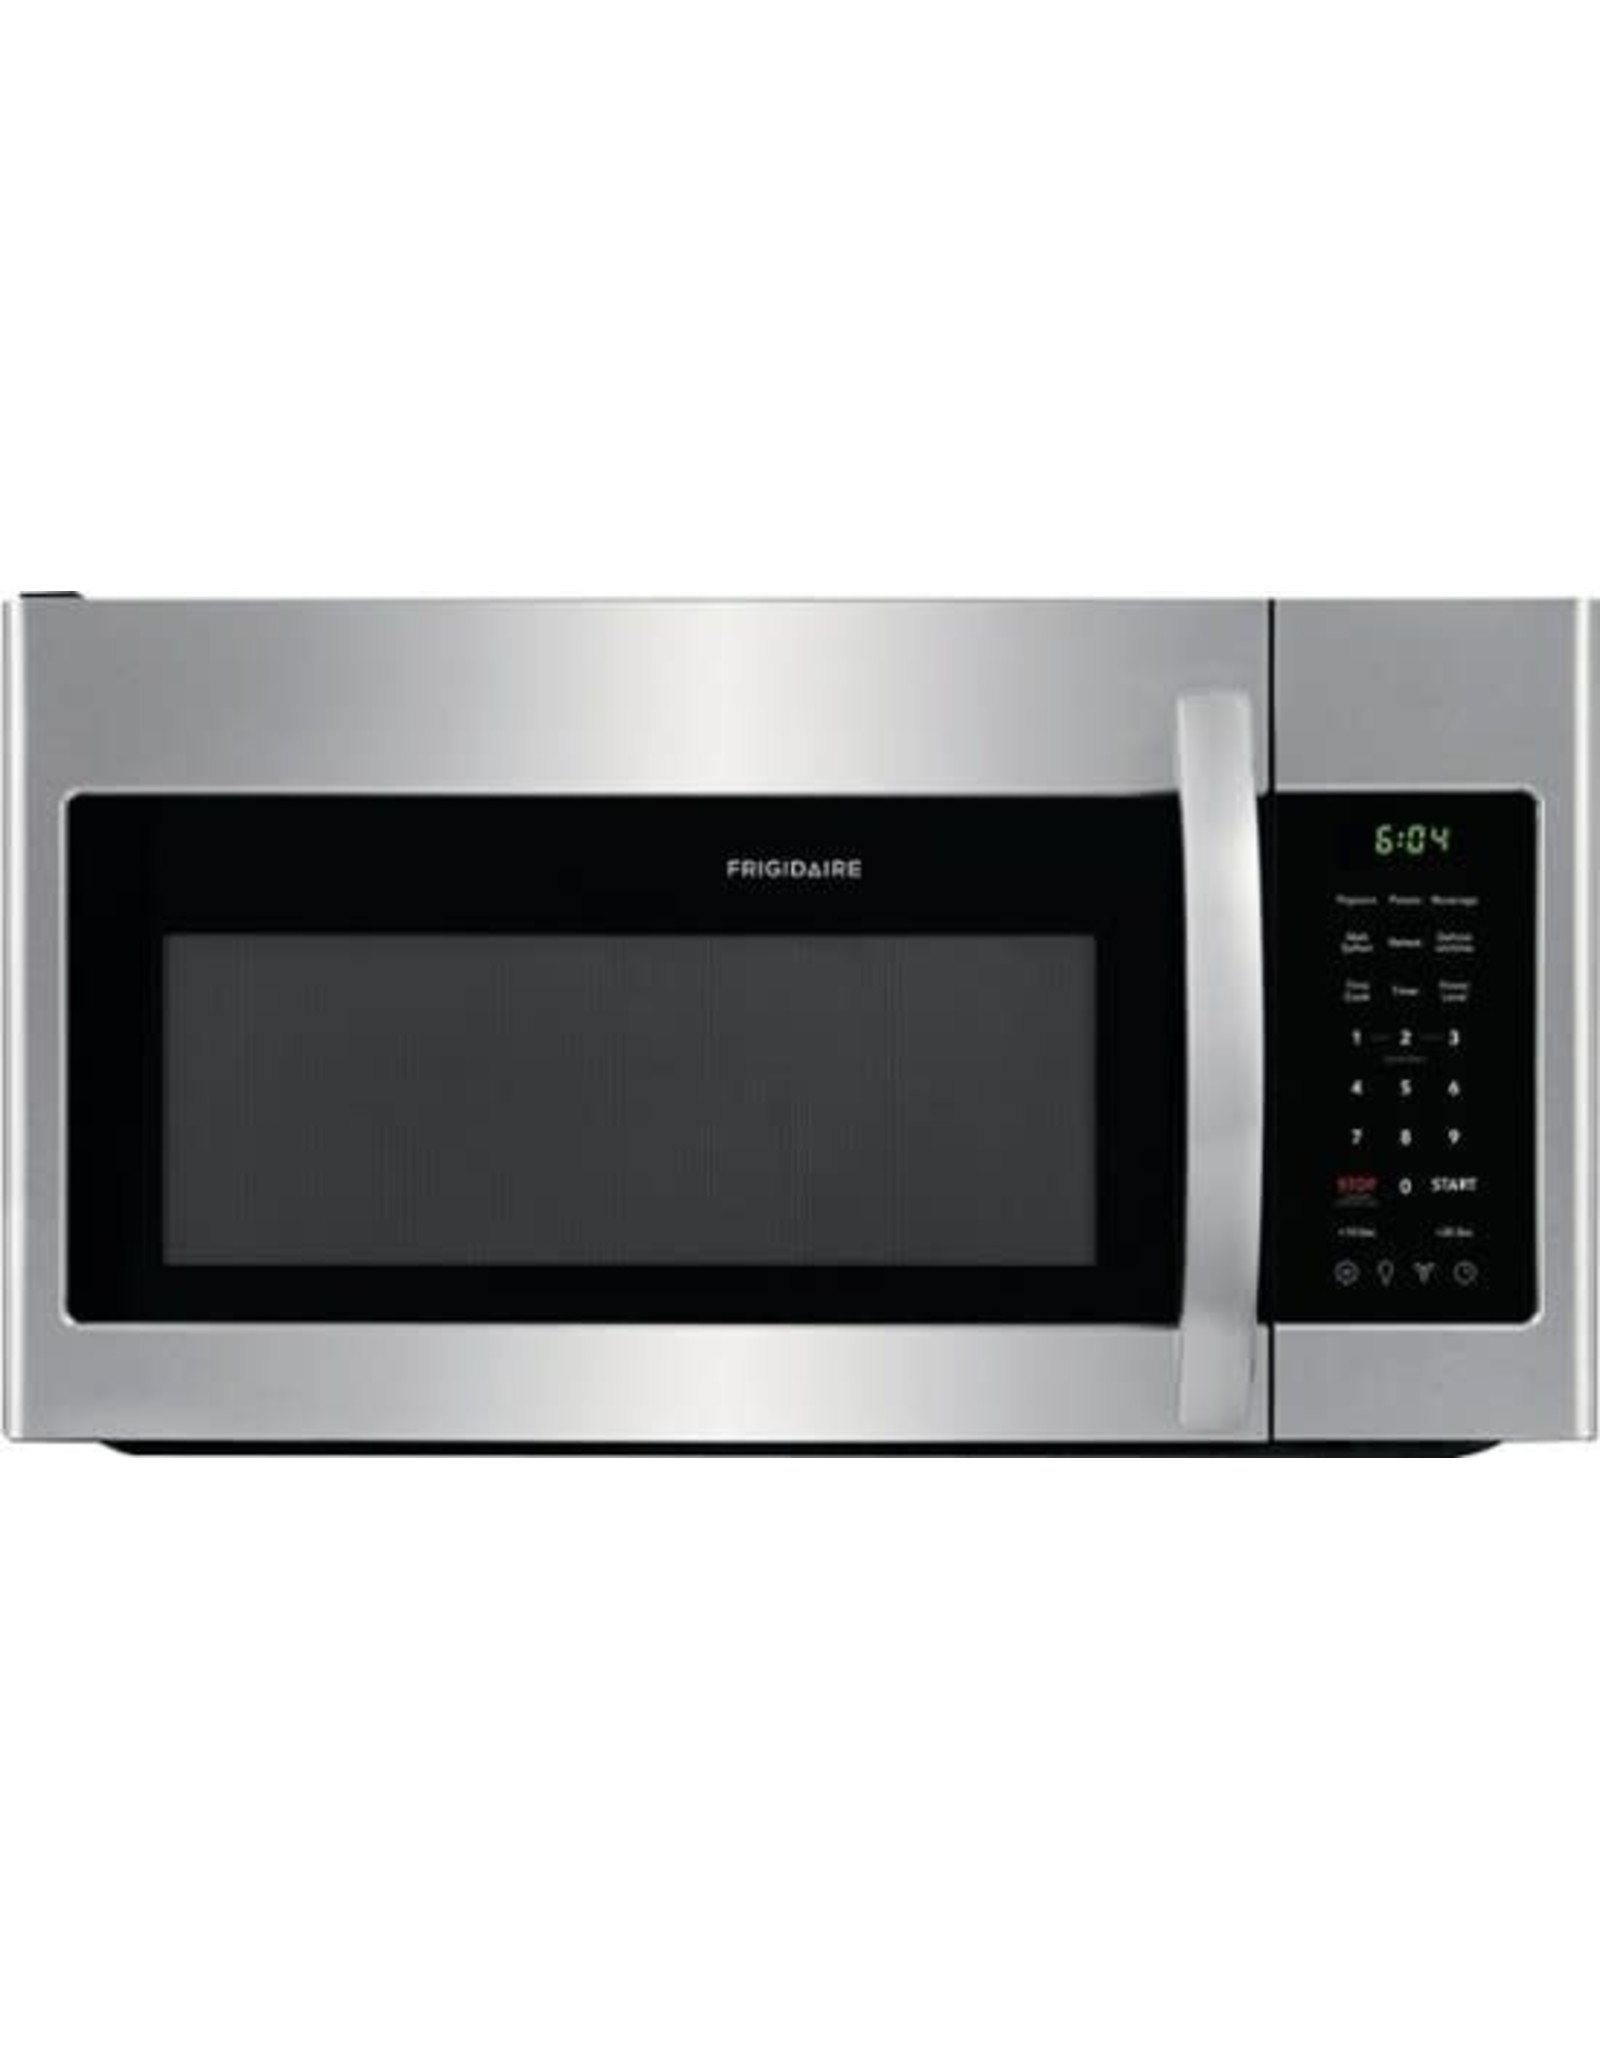 FRIGIDAIRE FFMV1846VS Frigidaire - 1.8 Cu. Ft. Over-the-Range Microwave - Stainless steel